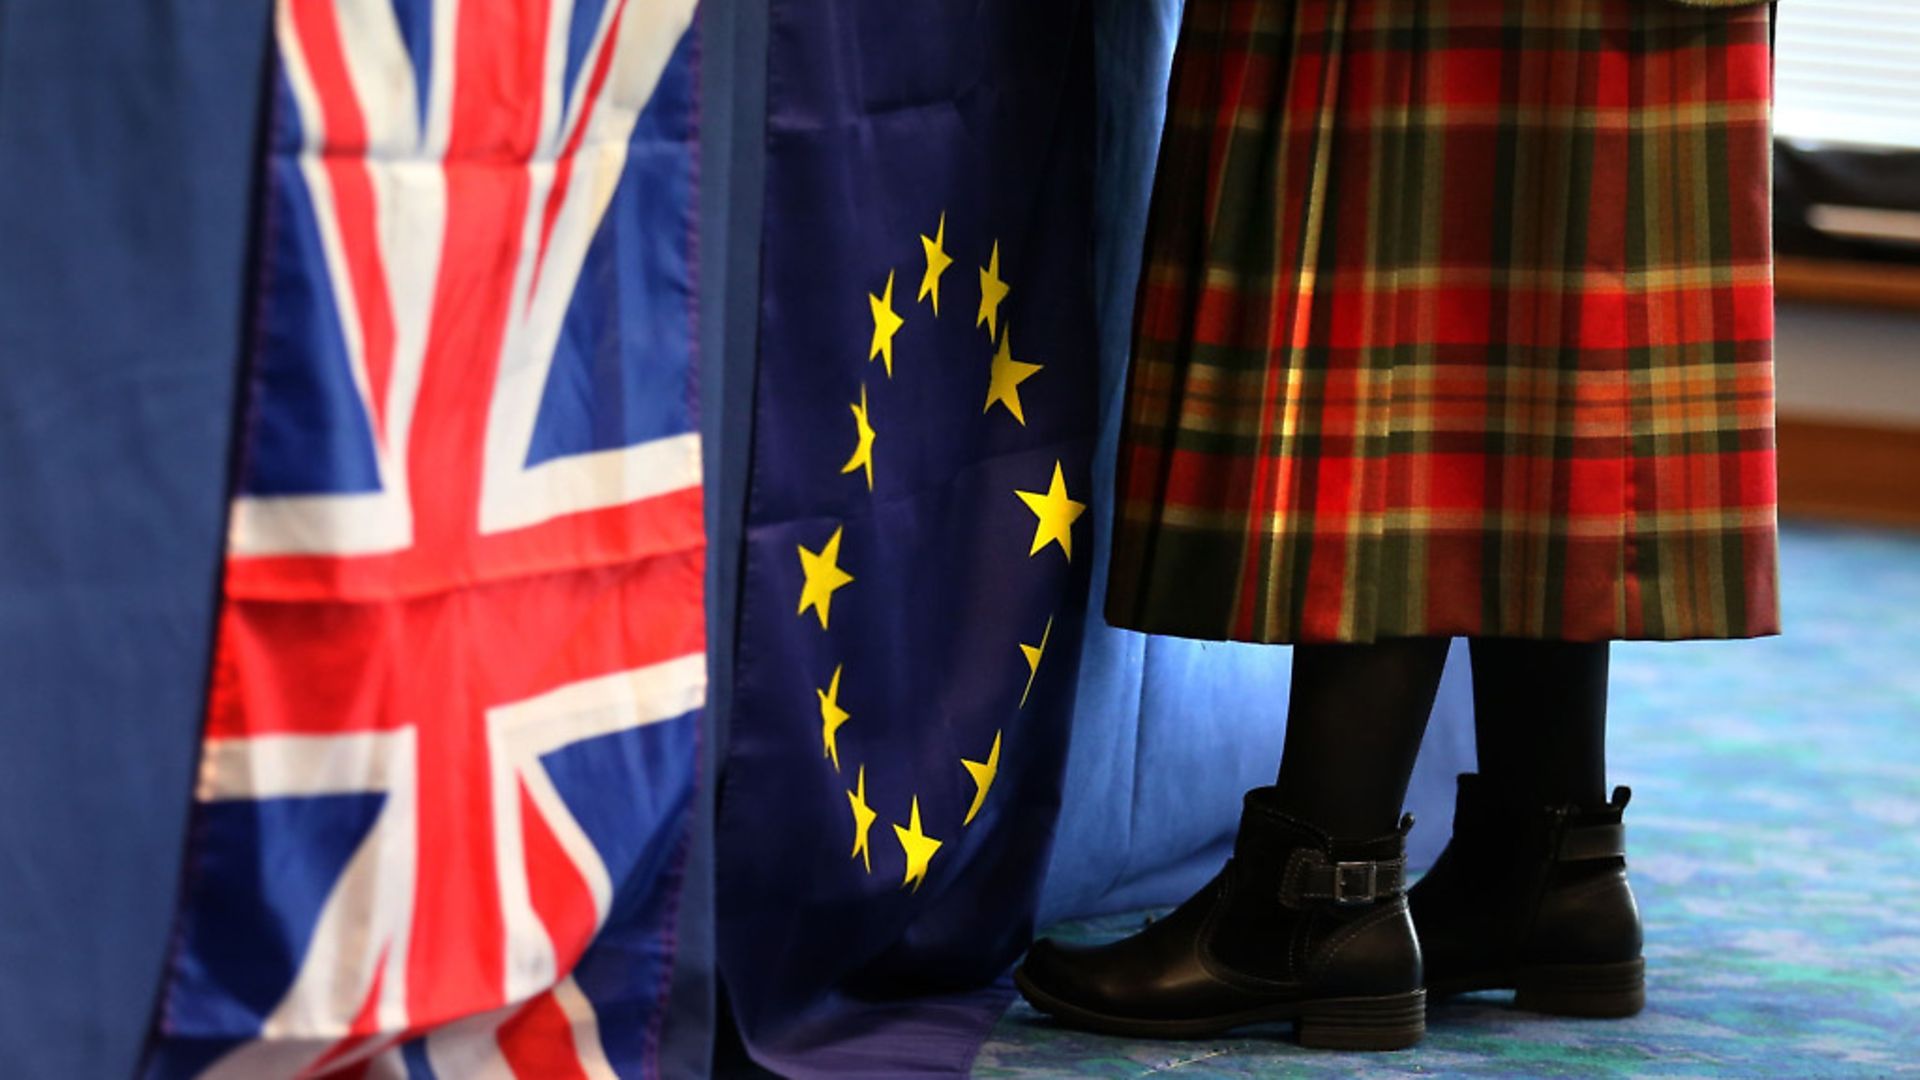 Can Britain ever fully escape the EU? Photo: PA / Andrew Milligan - Credit: PA Archive/PA Images